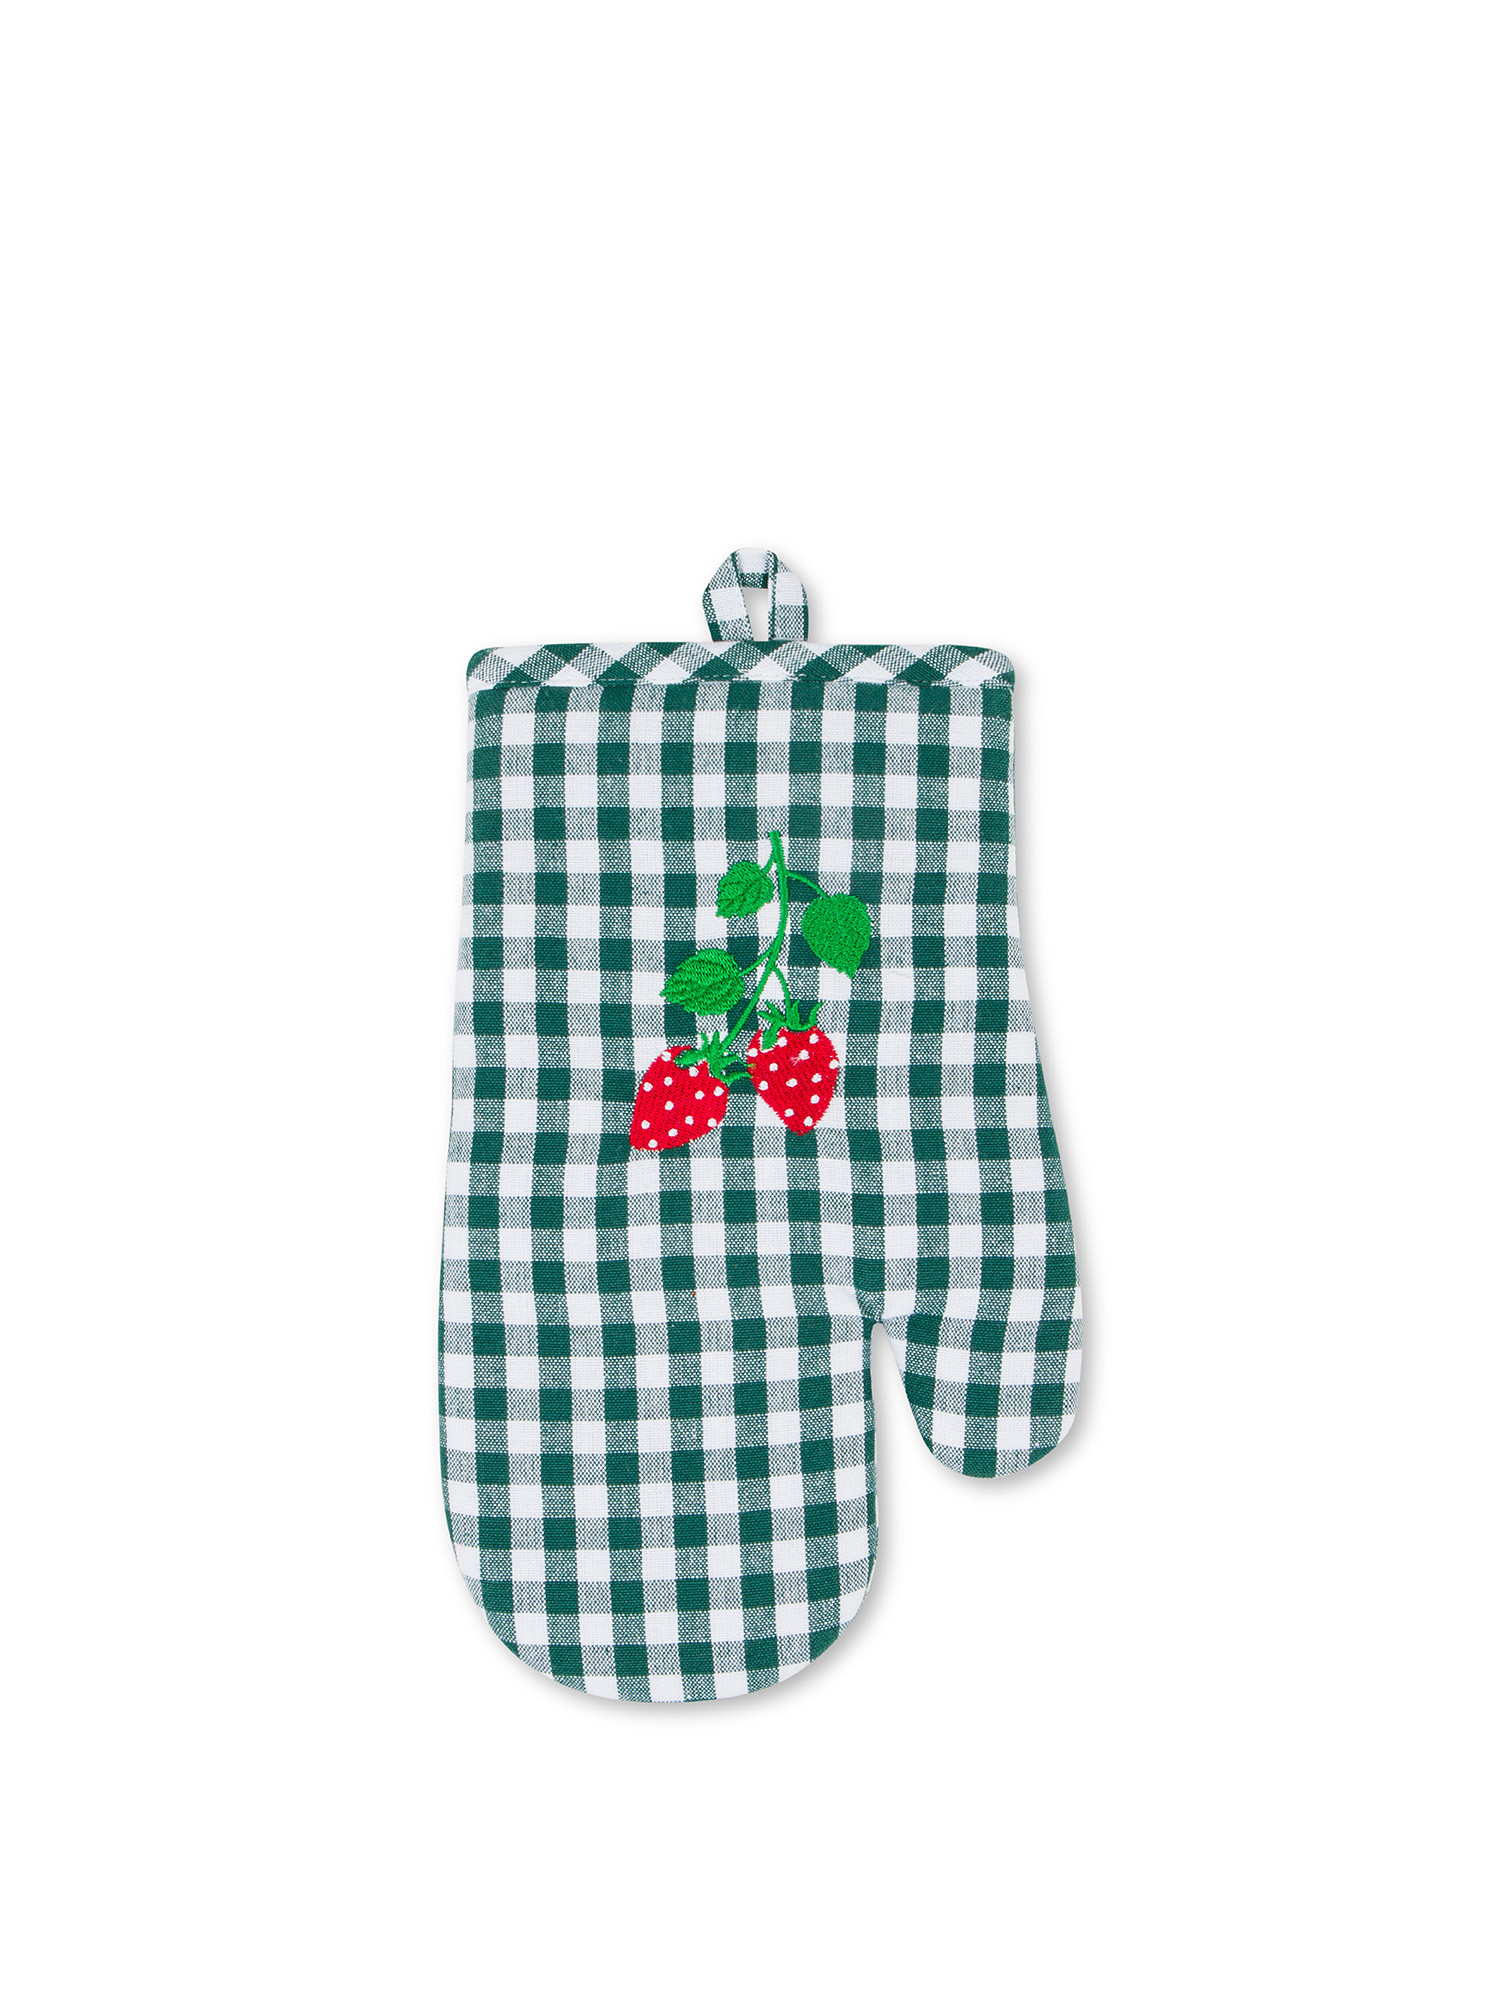 Vichy cotton kitchen glove with strawberry embroidery, Dark Green, large image number 0